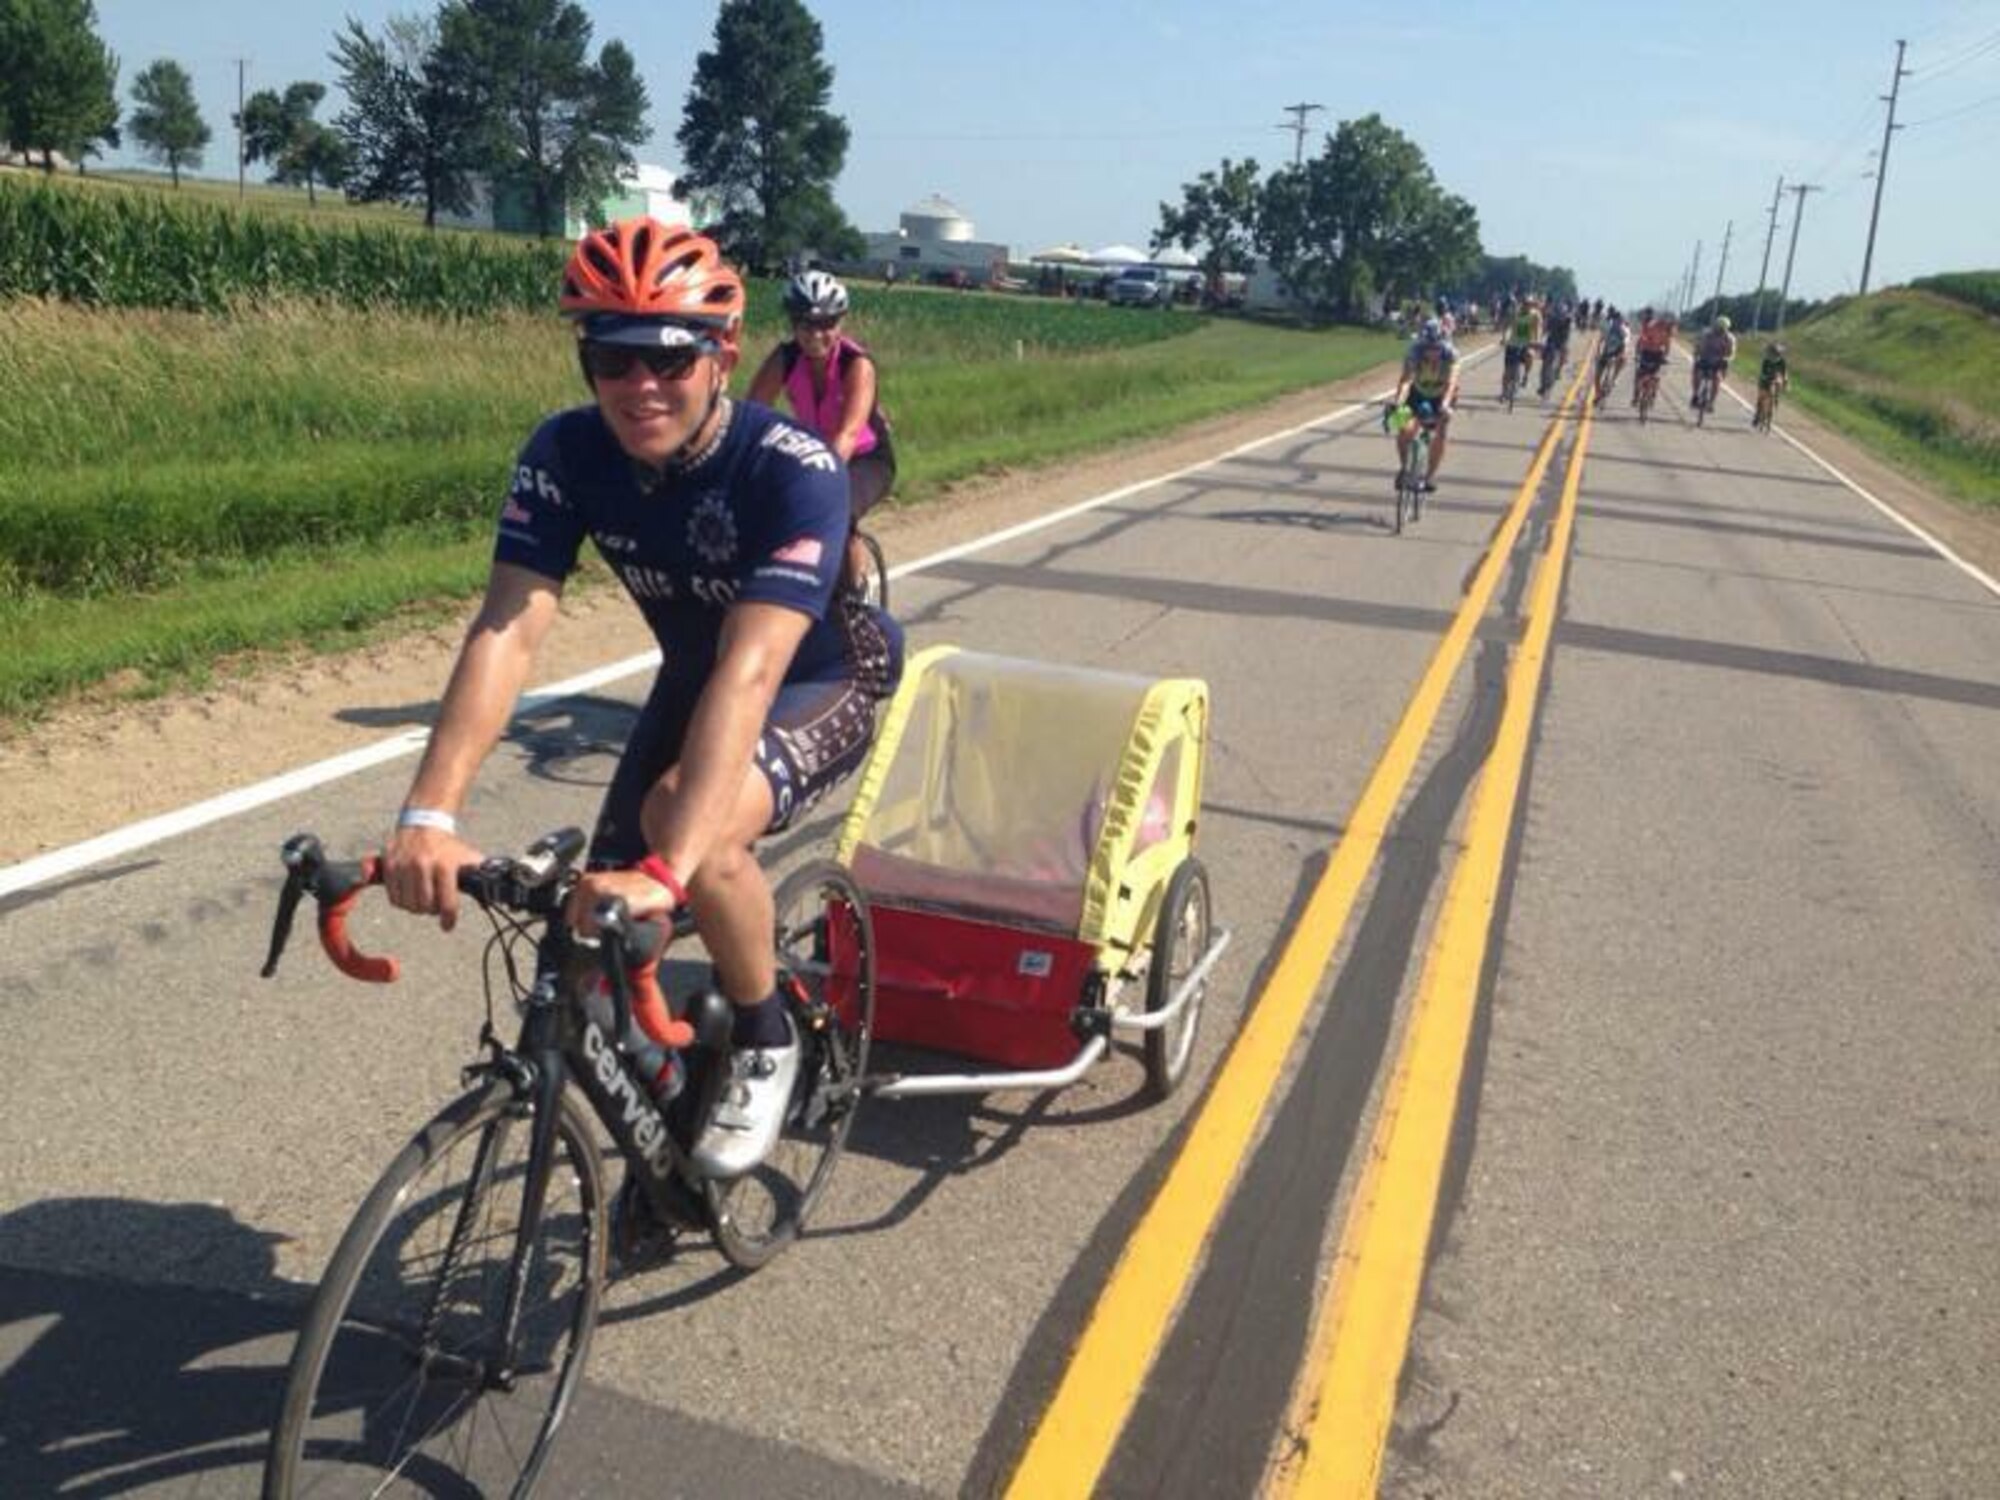 Senior Airman Jacob Pinkney, 860th Aircraft Maintenance Squadron C-17 Globemaster III crew chief and a member of the Air Force Cycling Team, pulls a toddler in a stroller carrier to give the child's mother a break during the Register's Annual Great Bike Ride Across Iowa July 26, 2017. During the RAGBRAI, AFCT members provided assistance to more than 5,000 cyclists. The team works to promote the Air Force by interacting with the American public at cycling events across the United States. (Courtesy Photo)